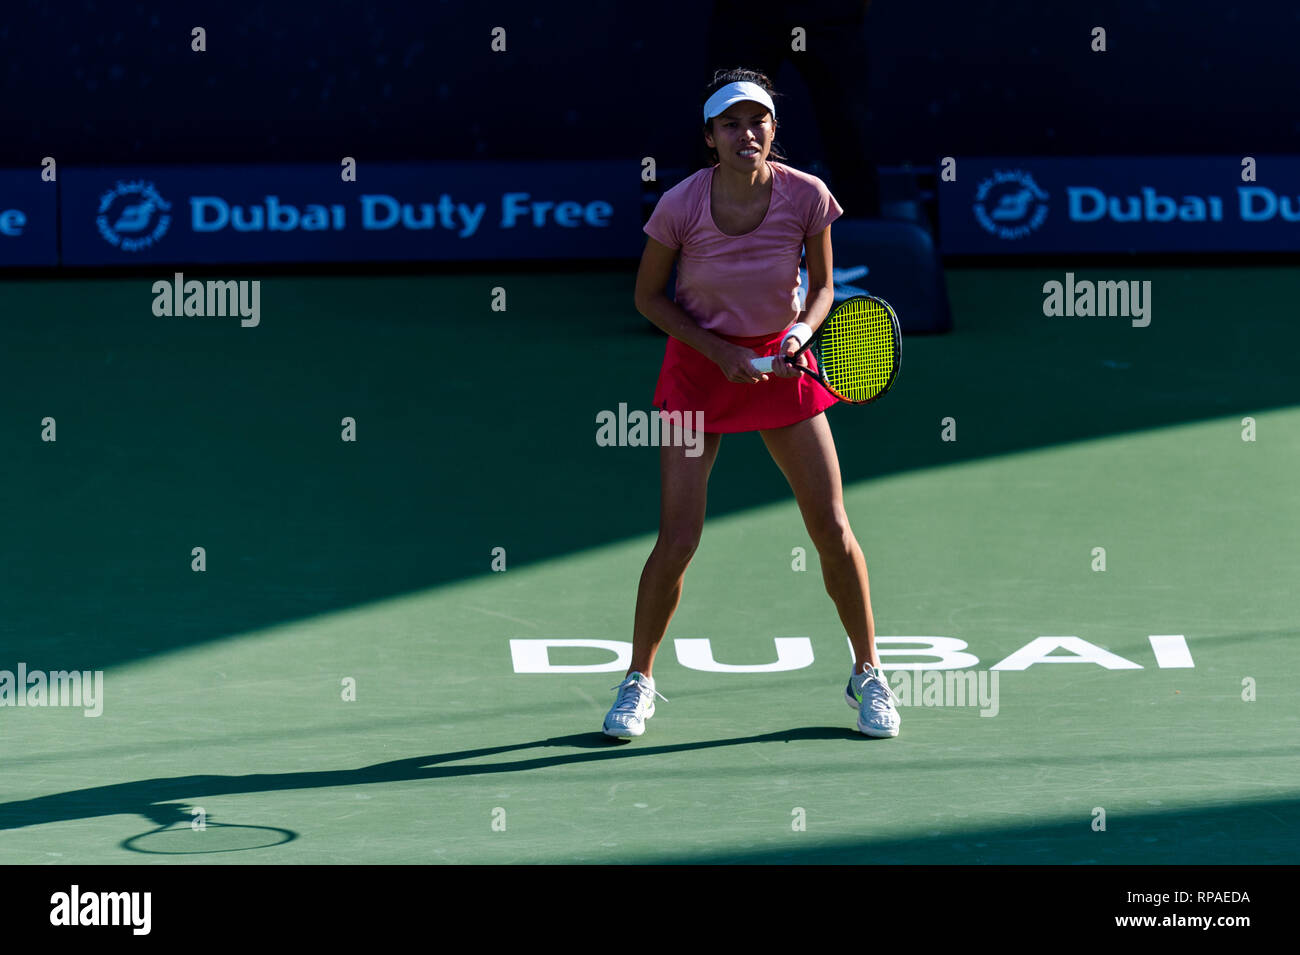 Dubai, UAE. 21st February, 2019. Su-Wei Hsieh of Taipei surrounded by  shadow in the quarter final match against Karolina Pliskova of the Czech  Republic during the Dubai Duty Free Tennis Championship at